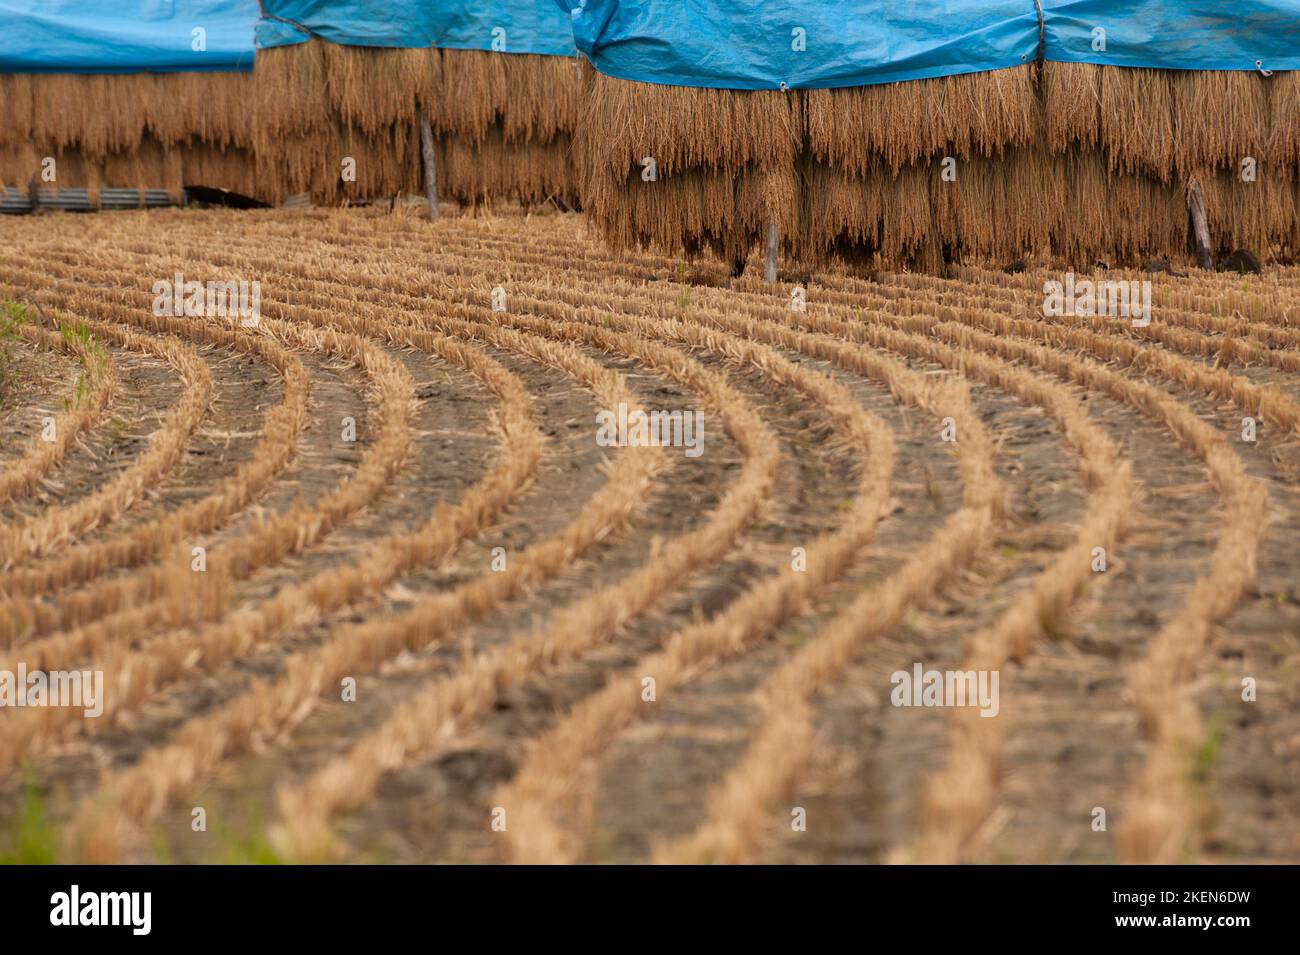 A rice paddy after harvest, with stooked rice protected by blue tarps, Matsumoto, Japan. Stock Photo